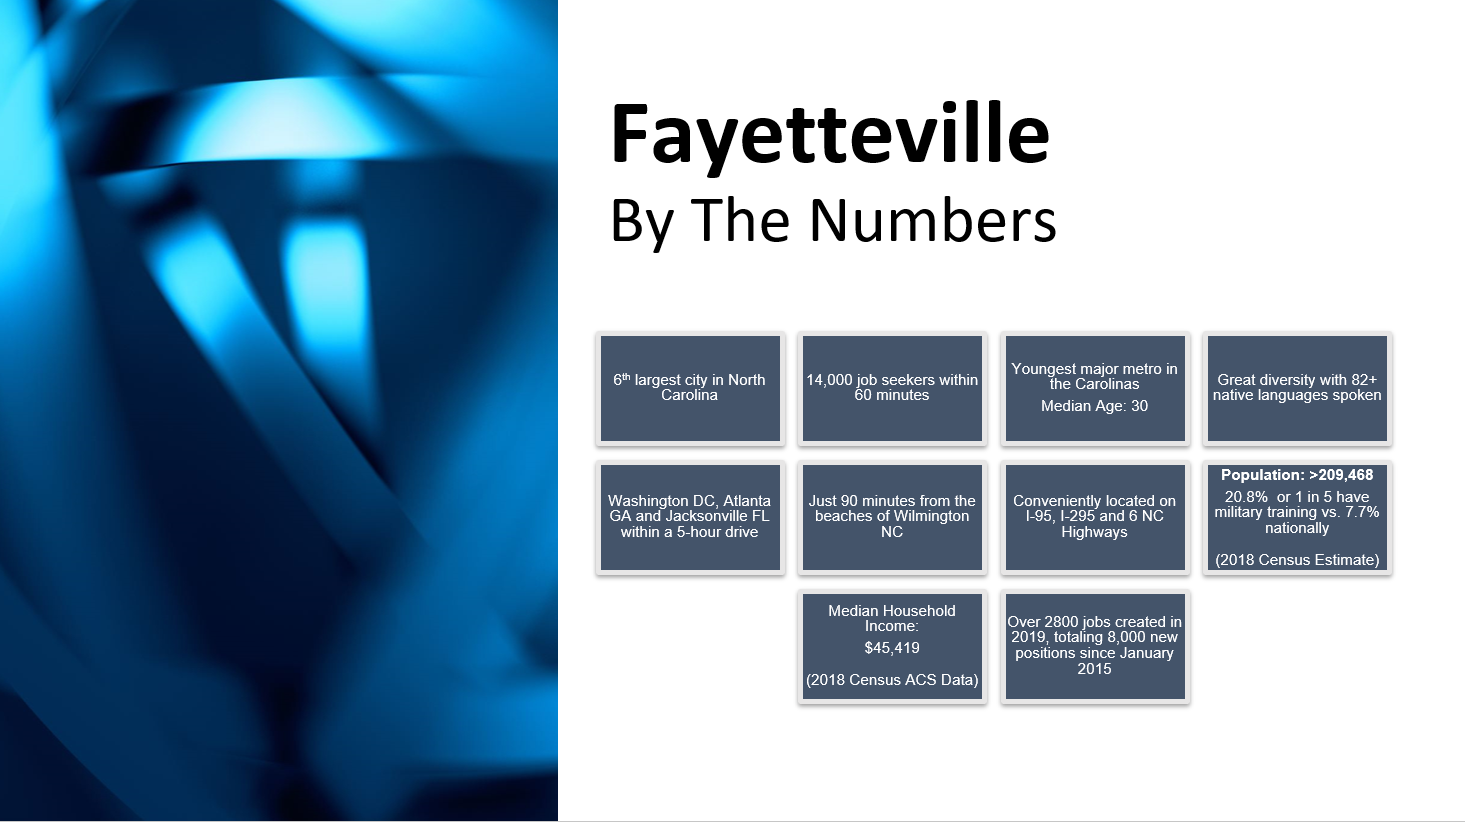 Fayetteville By the Numbers